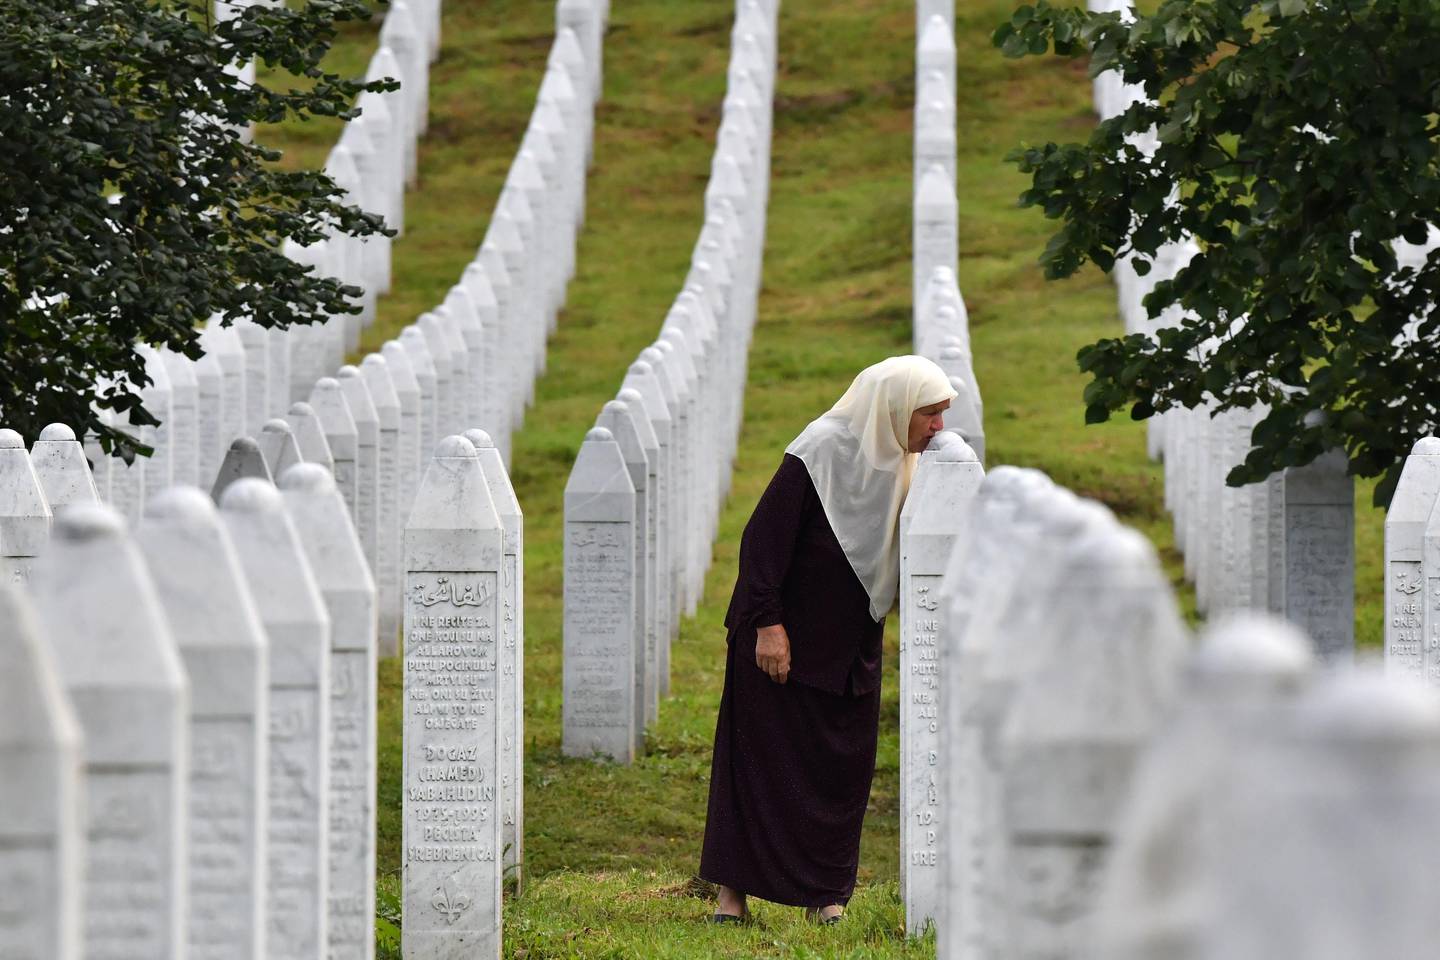 Bosnian Muslim woman Mejra Djogaz, 71, survivor of Srebrenica 1995 massacre, kisses her sons' tombstones, Omer, 19, and Munib, 21, her two sons killed in the massive killing of Srebrenica during Bosnia's 1992-95 war, at Potocari memorial center, near Srebrenica on July 3, 2020. - Eight thousands Muslim men and boys were killed by Serb forces in the eastern enclave towards the end of Bosnia's 1992-95 war, an atrocity deemed a genocide by international courts, whose remains were found in mass graves after the conflict, were buried a decade ago in the memorial centre where more than 6,600 victims of the victims lie.
Another 237 have been laid to rest at other sites. But more than 1,000 people have never been found, an acute source of pain for survivors. (Photo by ELVIS BARUKCIC / AFP)